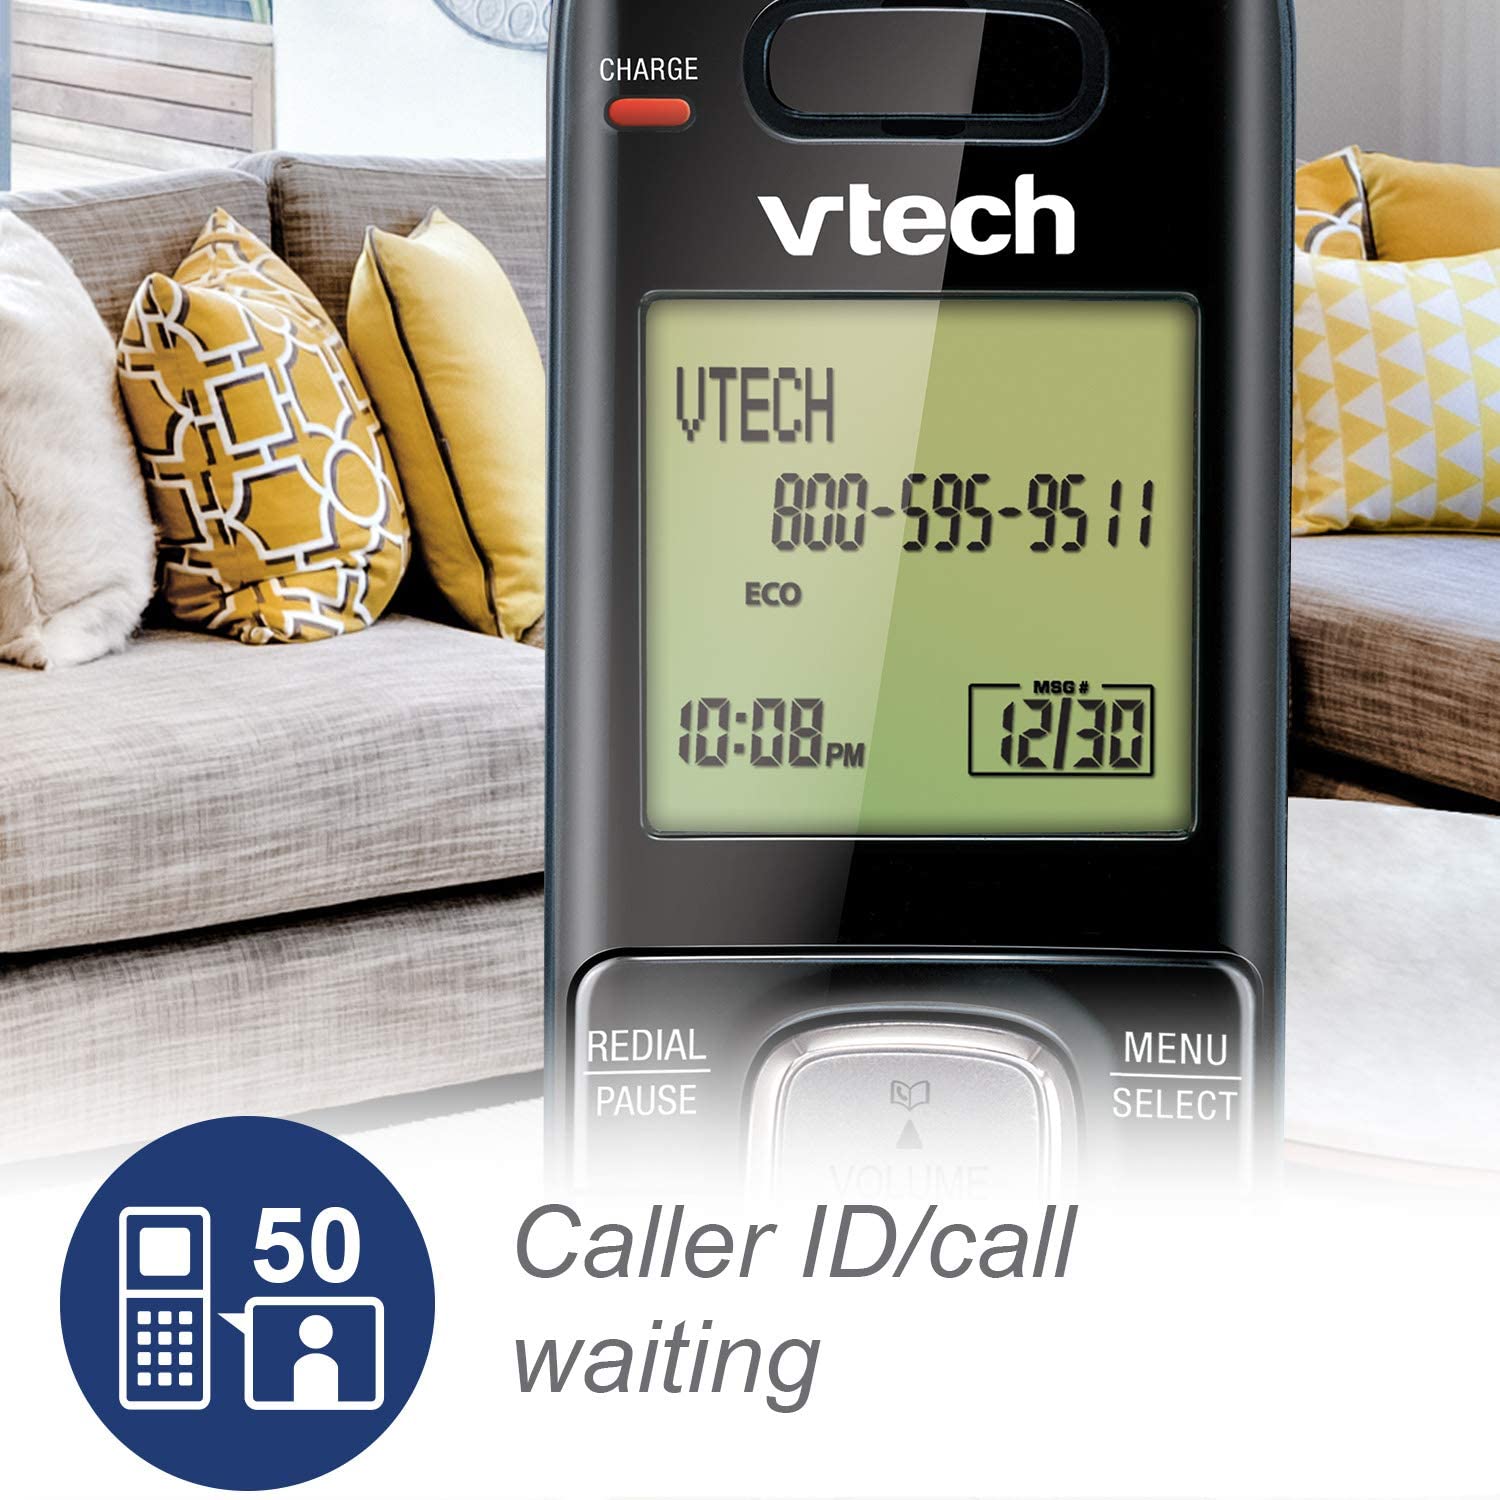 VTech CS6829 DECT 6.0 Cordless Phone Answering System, Silver and Black - with Caller ID/Call Waiting, 1 Cordless Handset